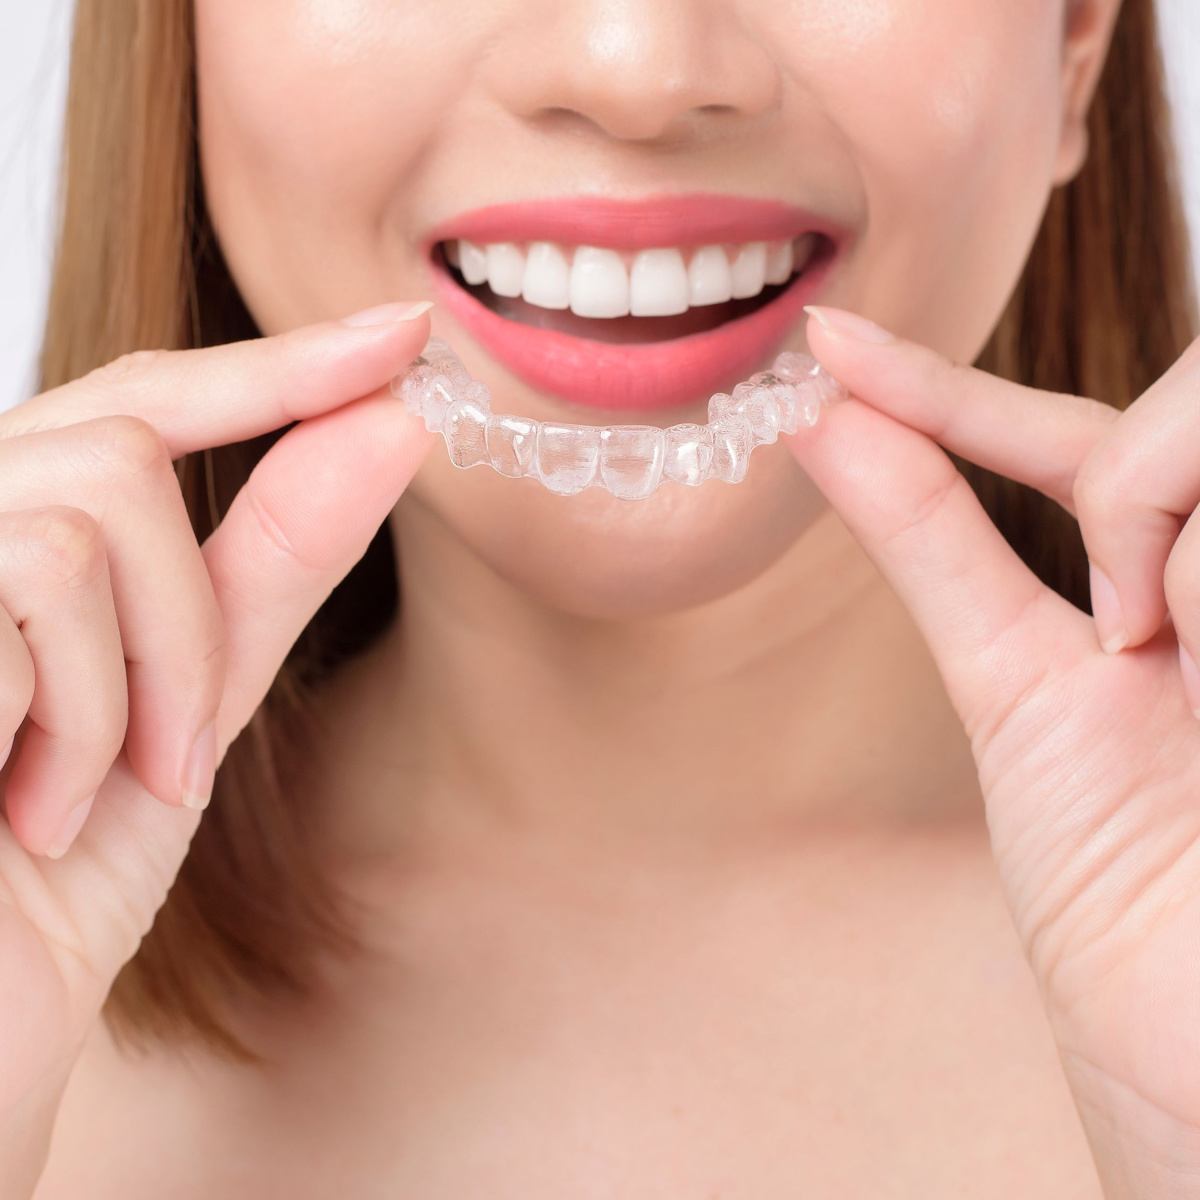 A smiling woman with Invisalign